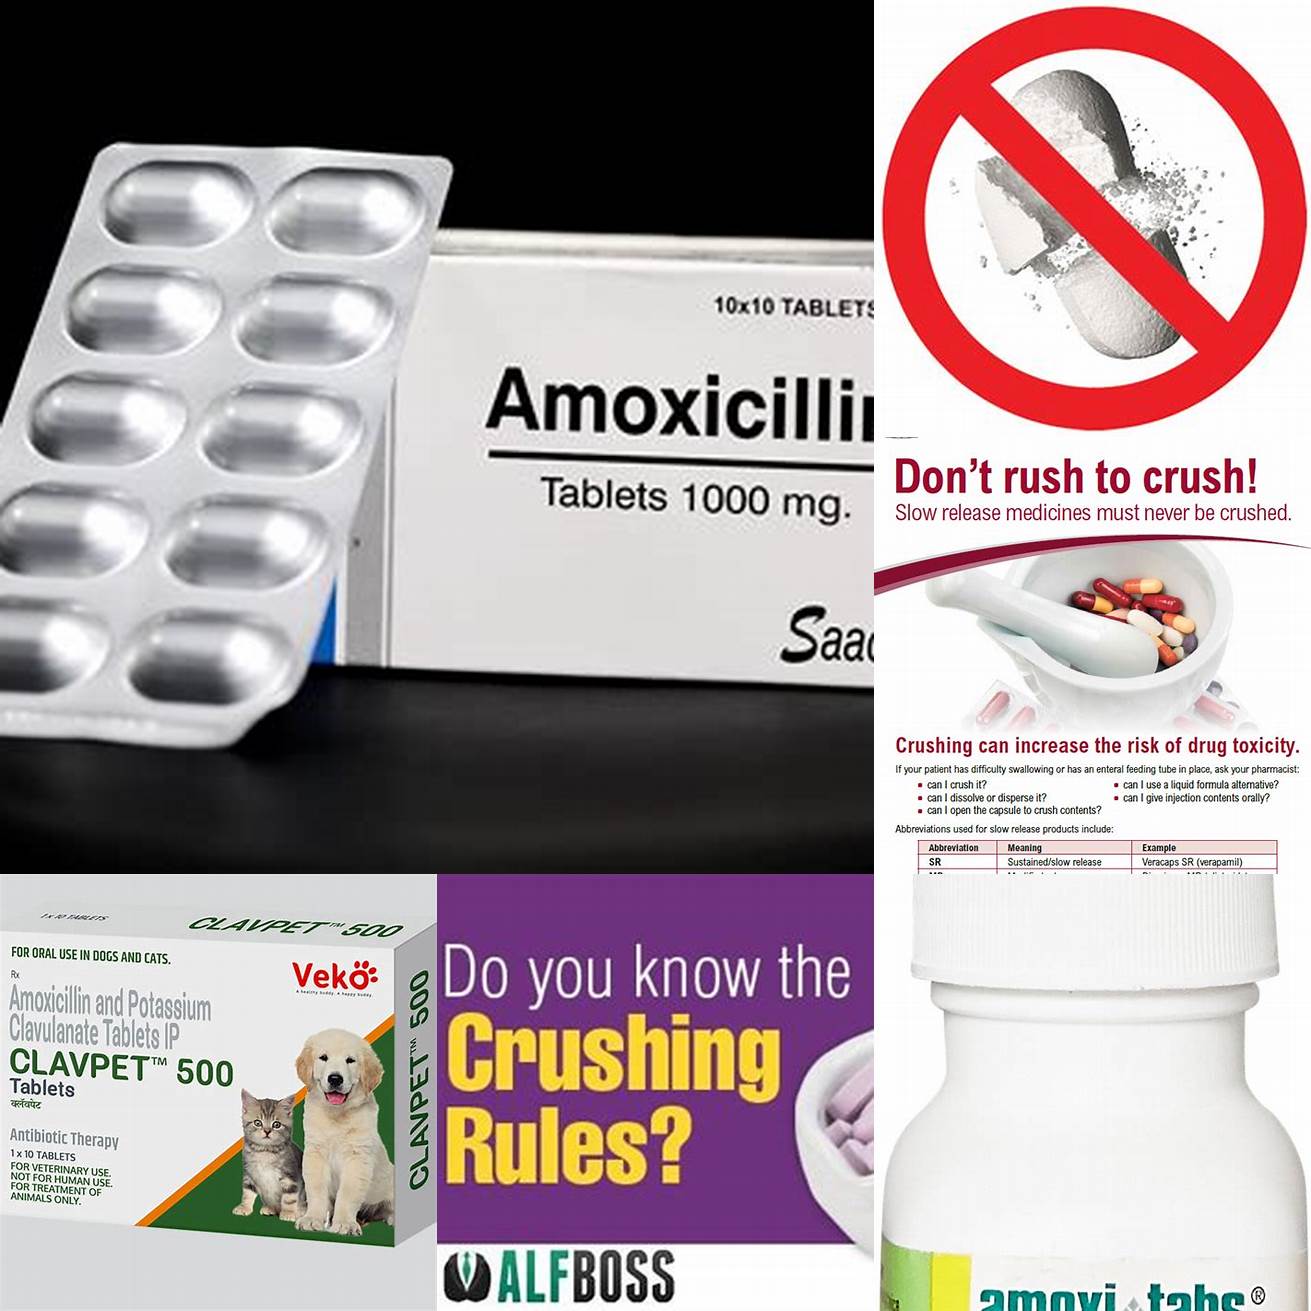 Do not crush or break amoxicillin tablets unless instructed by your veterinarian